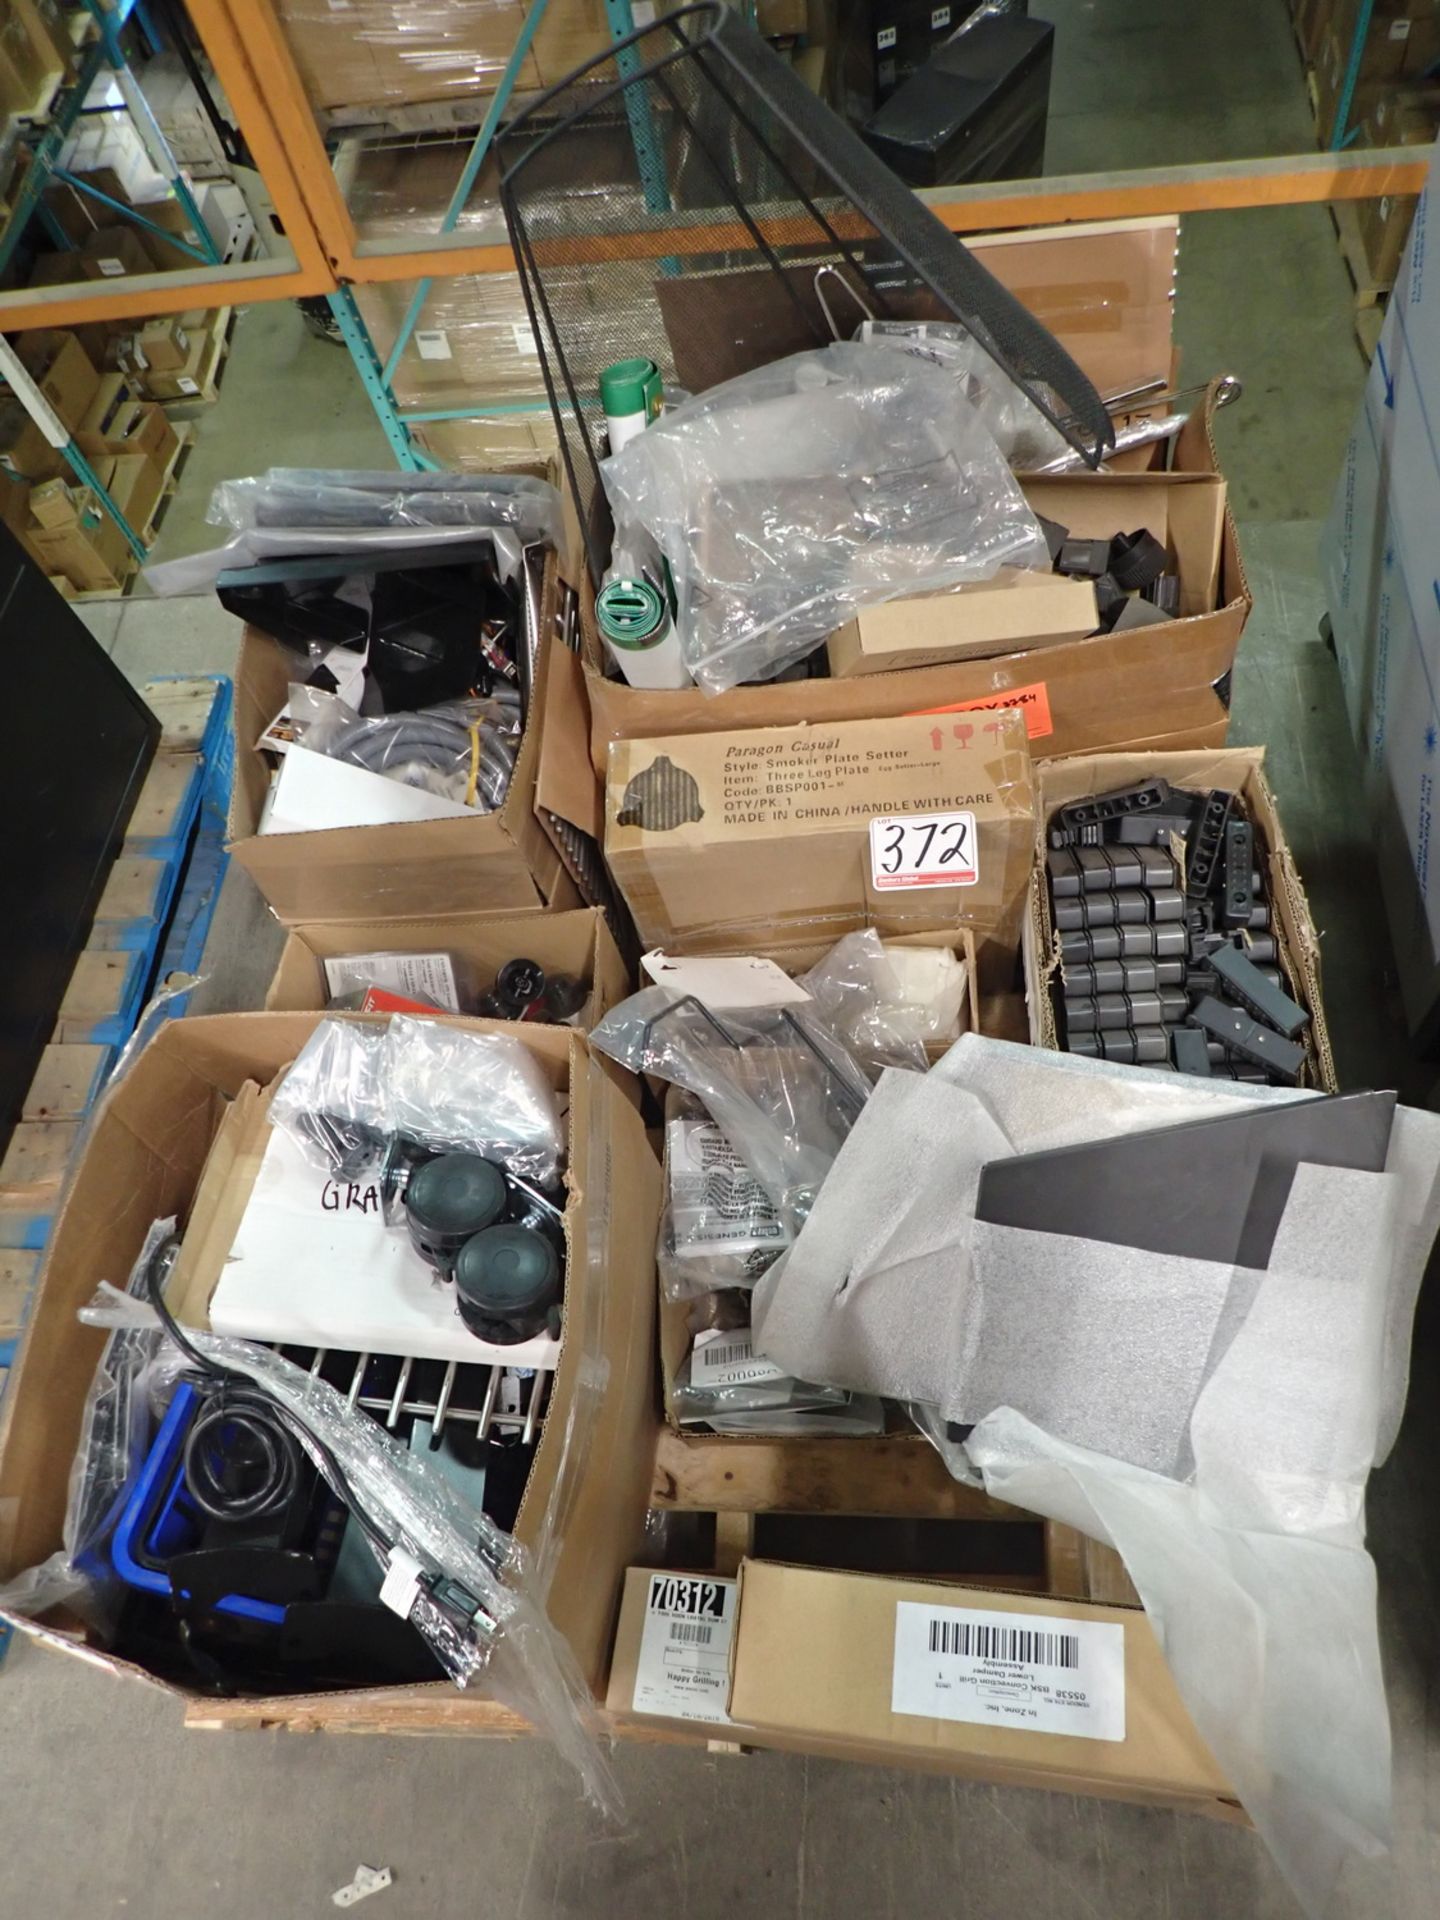 LOT - WEBER, BROIL KING ASSORTED TRAYS, VALVES, GRATES AND MORE